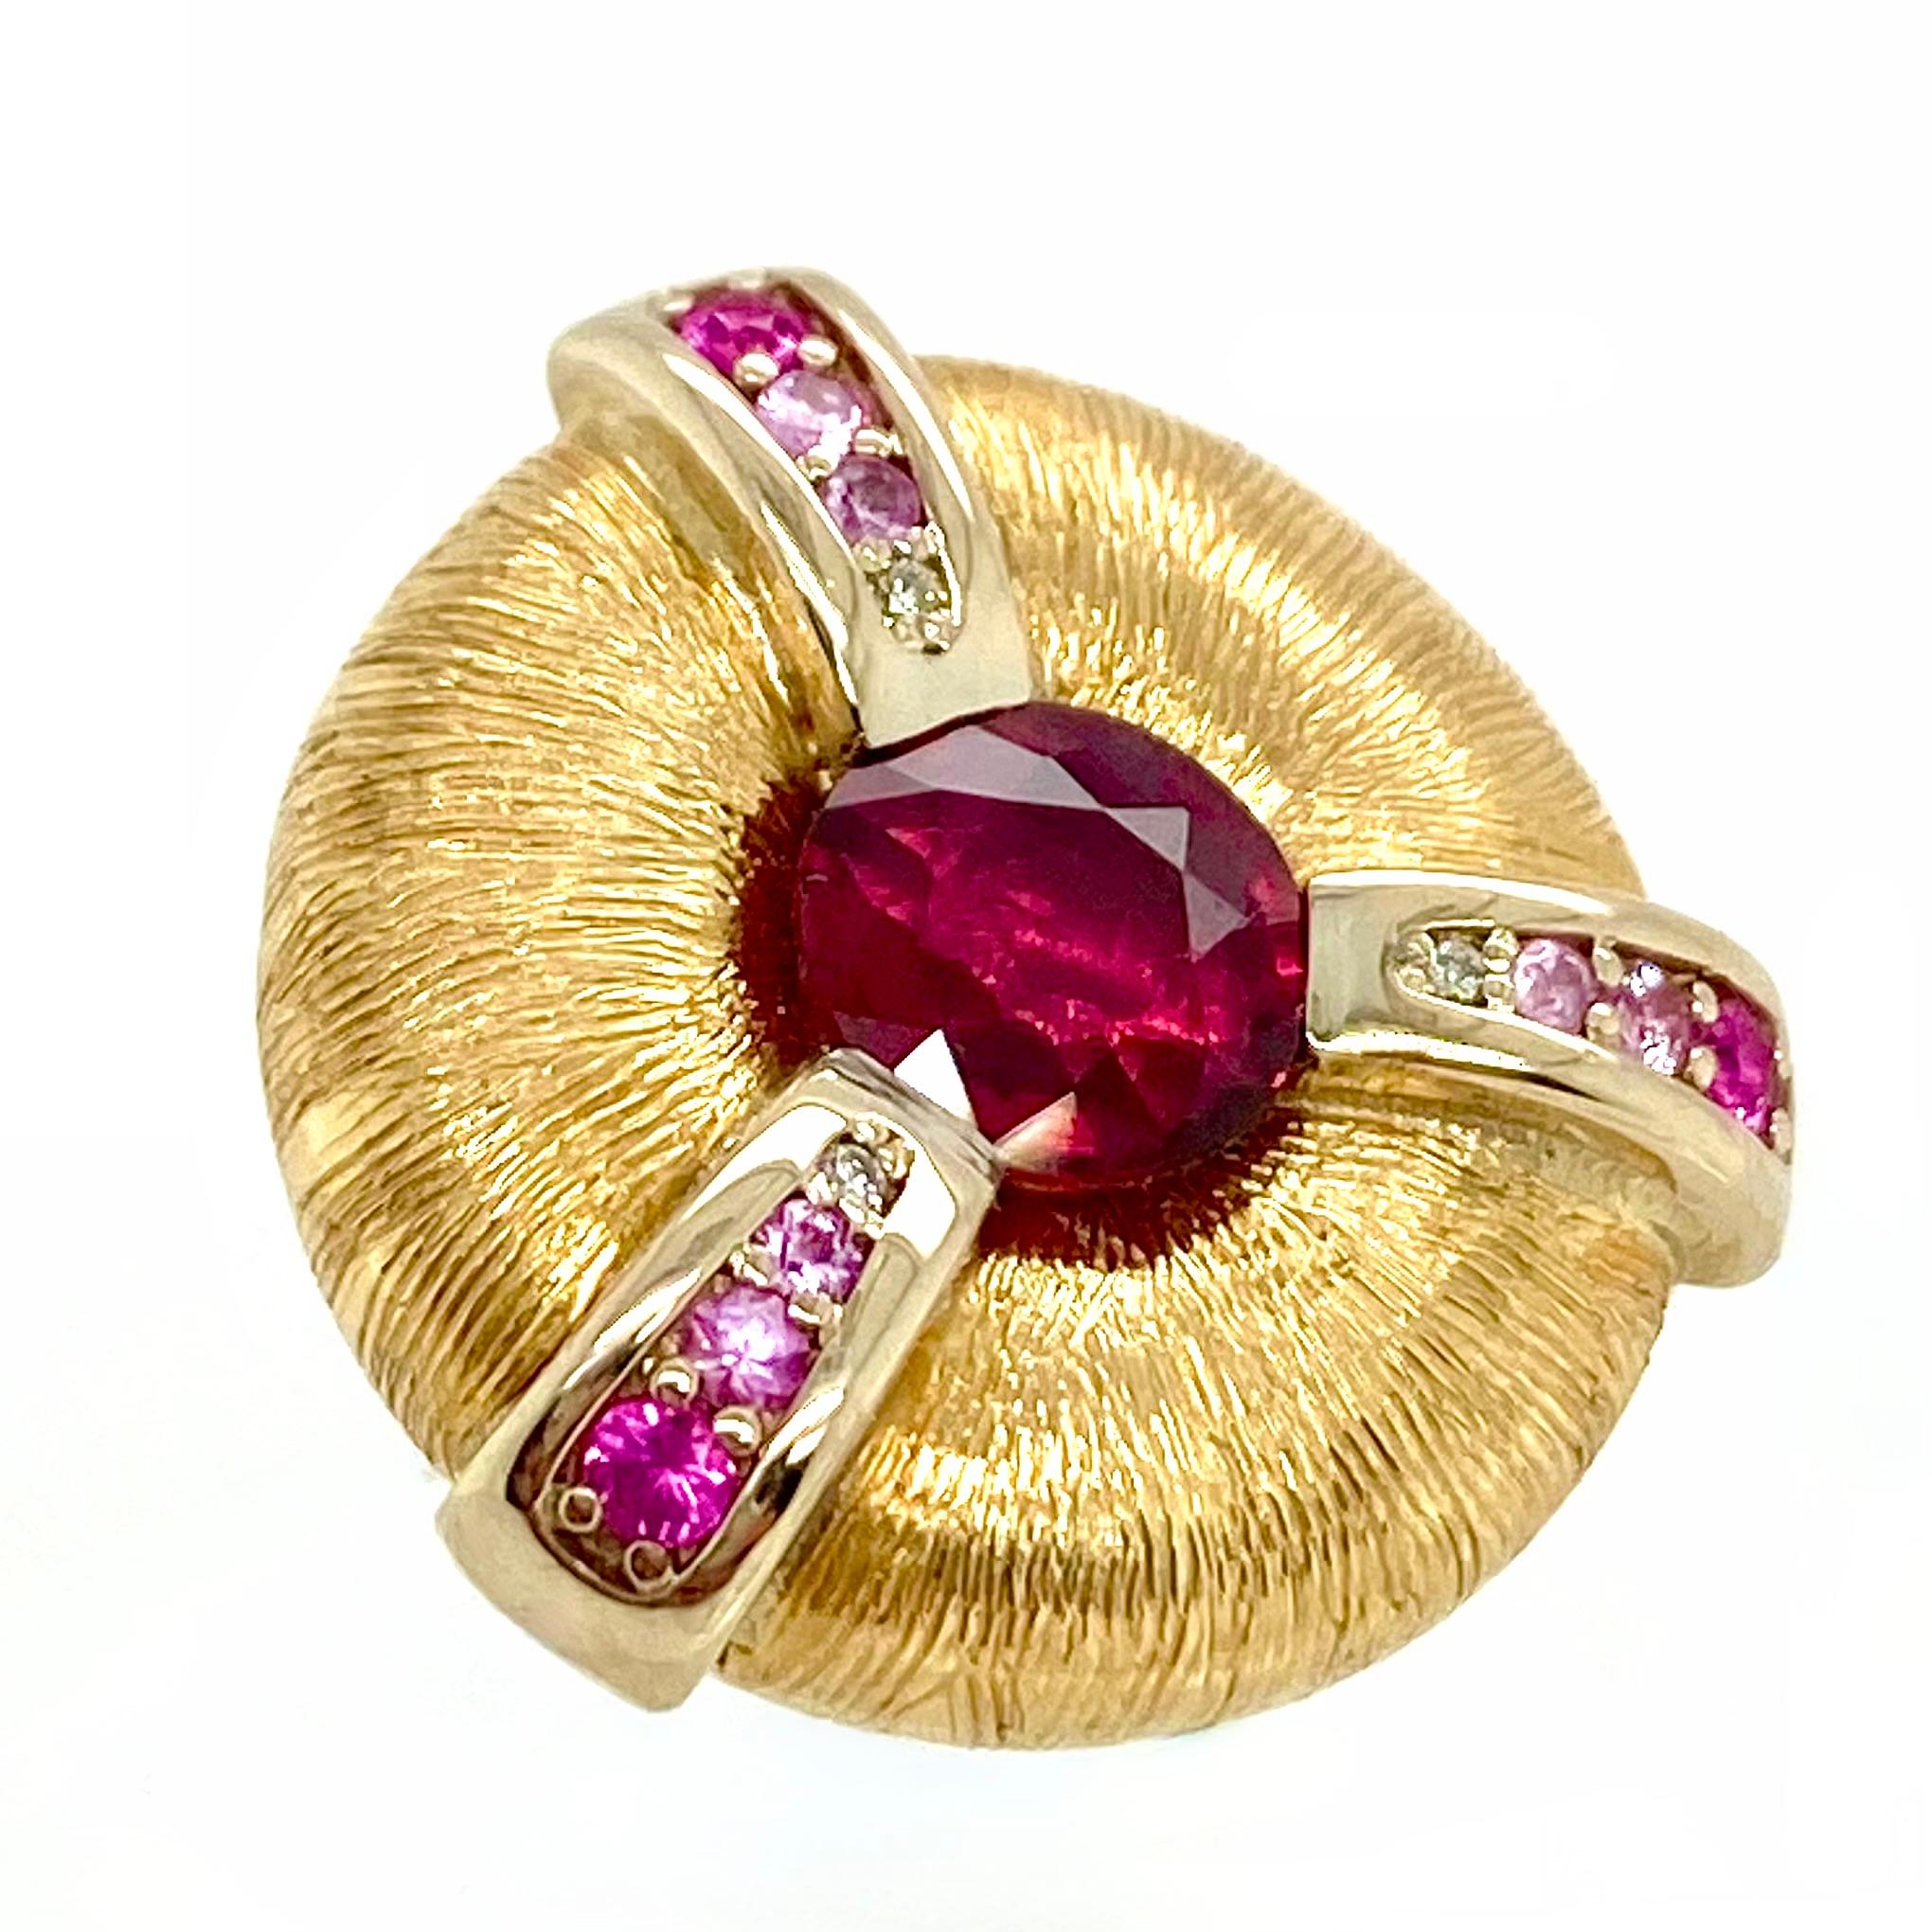 This one-of-a-kind Ruby ring in 18k yellow features a doughnut shaped top that holds the ruby in its center. Three 18k white gold bands spread out from the ruby towards the outer edge of the top. These bands are set with pink sapphires whose colors